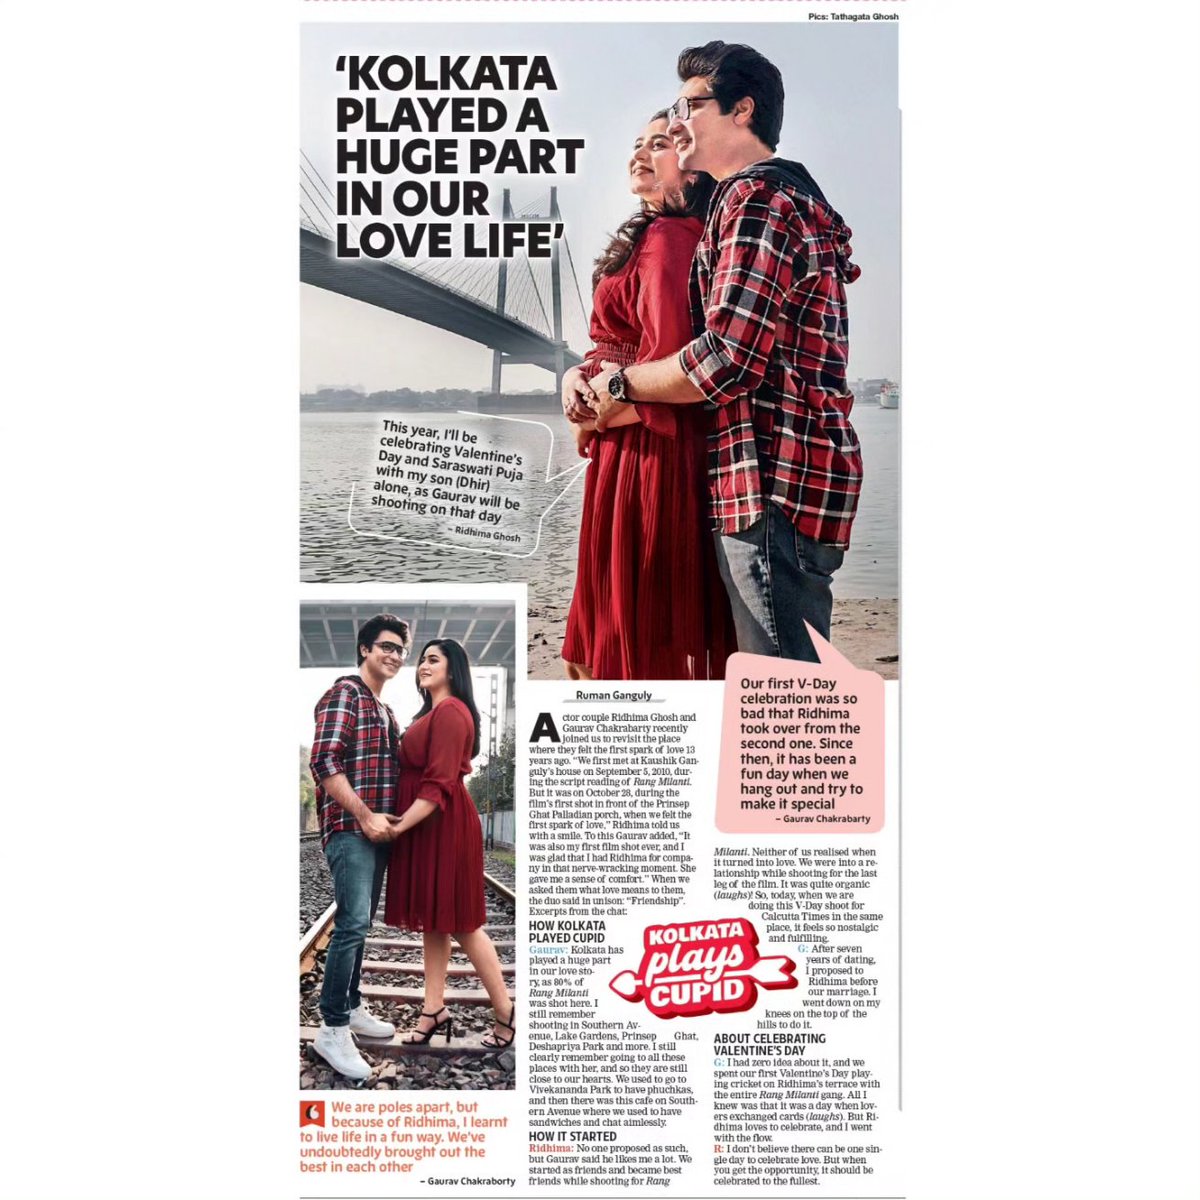 Actor couple and new parents Ridhima Ghosh and Gaurav Chakrabarty revisit their love story in which the city played cupid. Read more.. ❤ Picture Credit: Tathagata Ghosh #ridhimaghosh #gauravchakrabarty #lovestory #valentinesday #cupid #kolkata #calcuttatimes